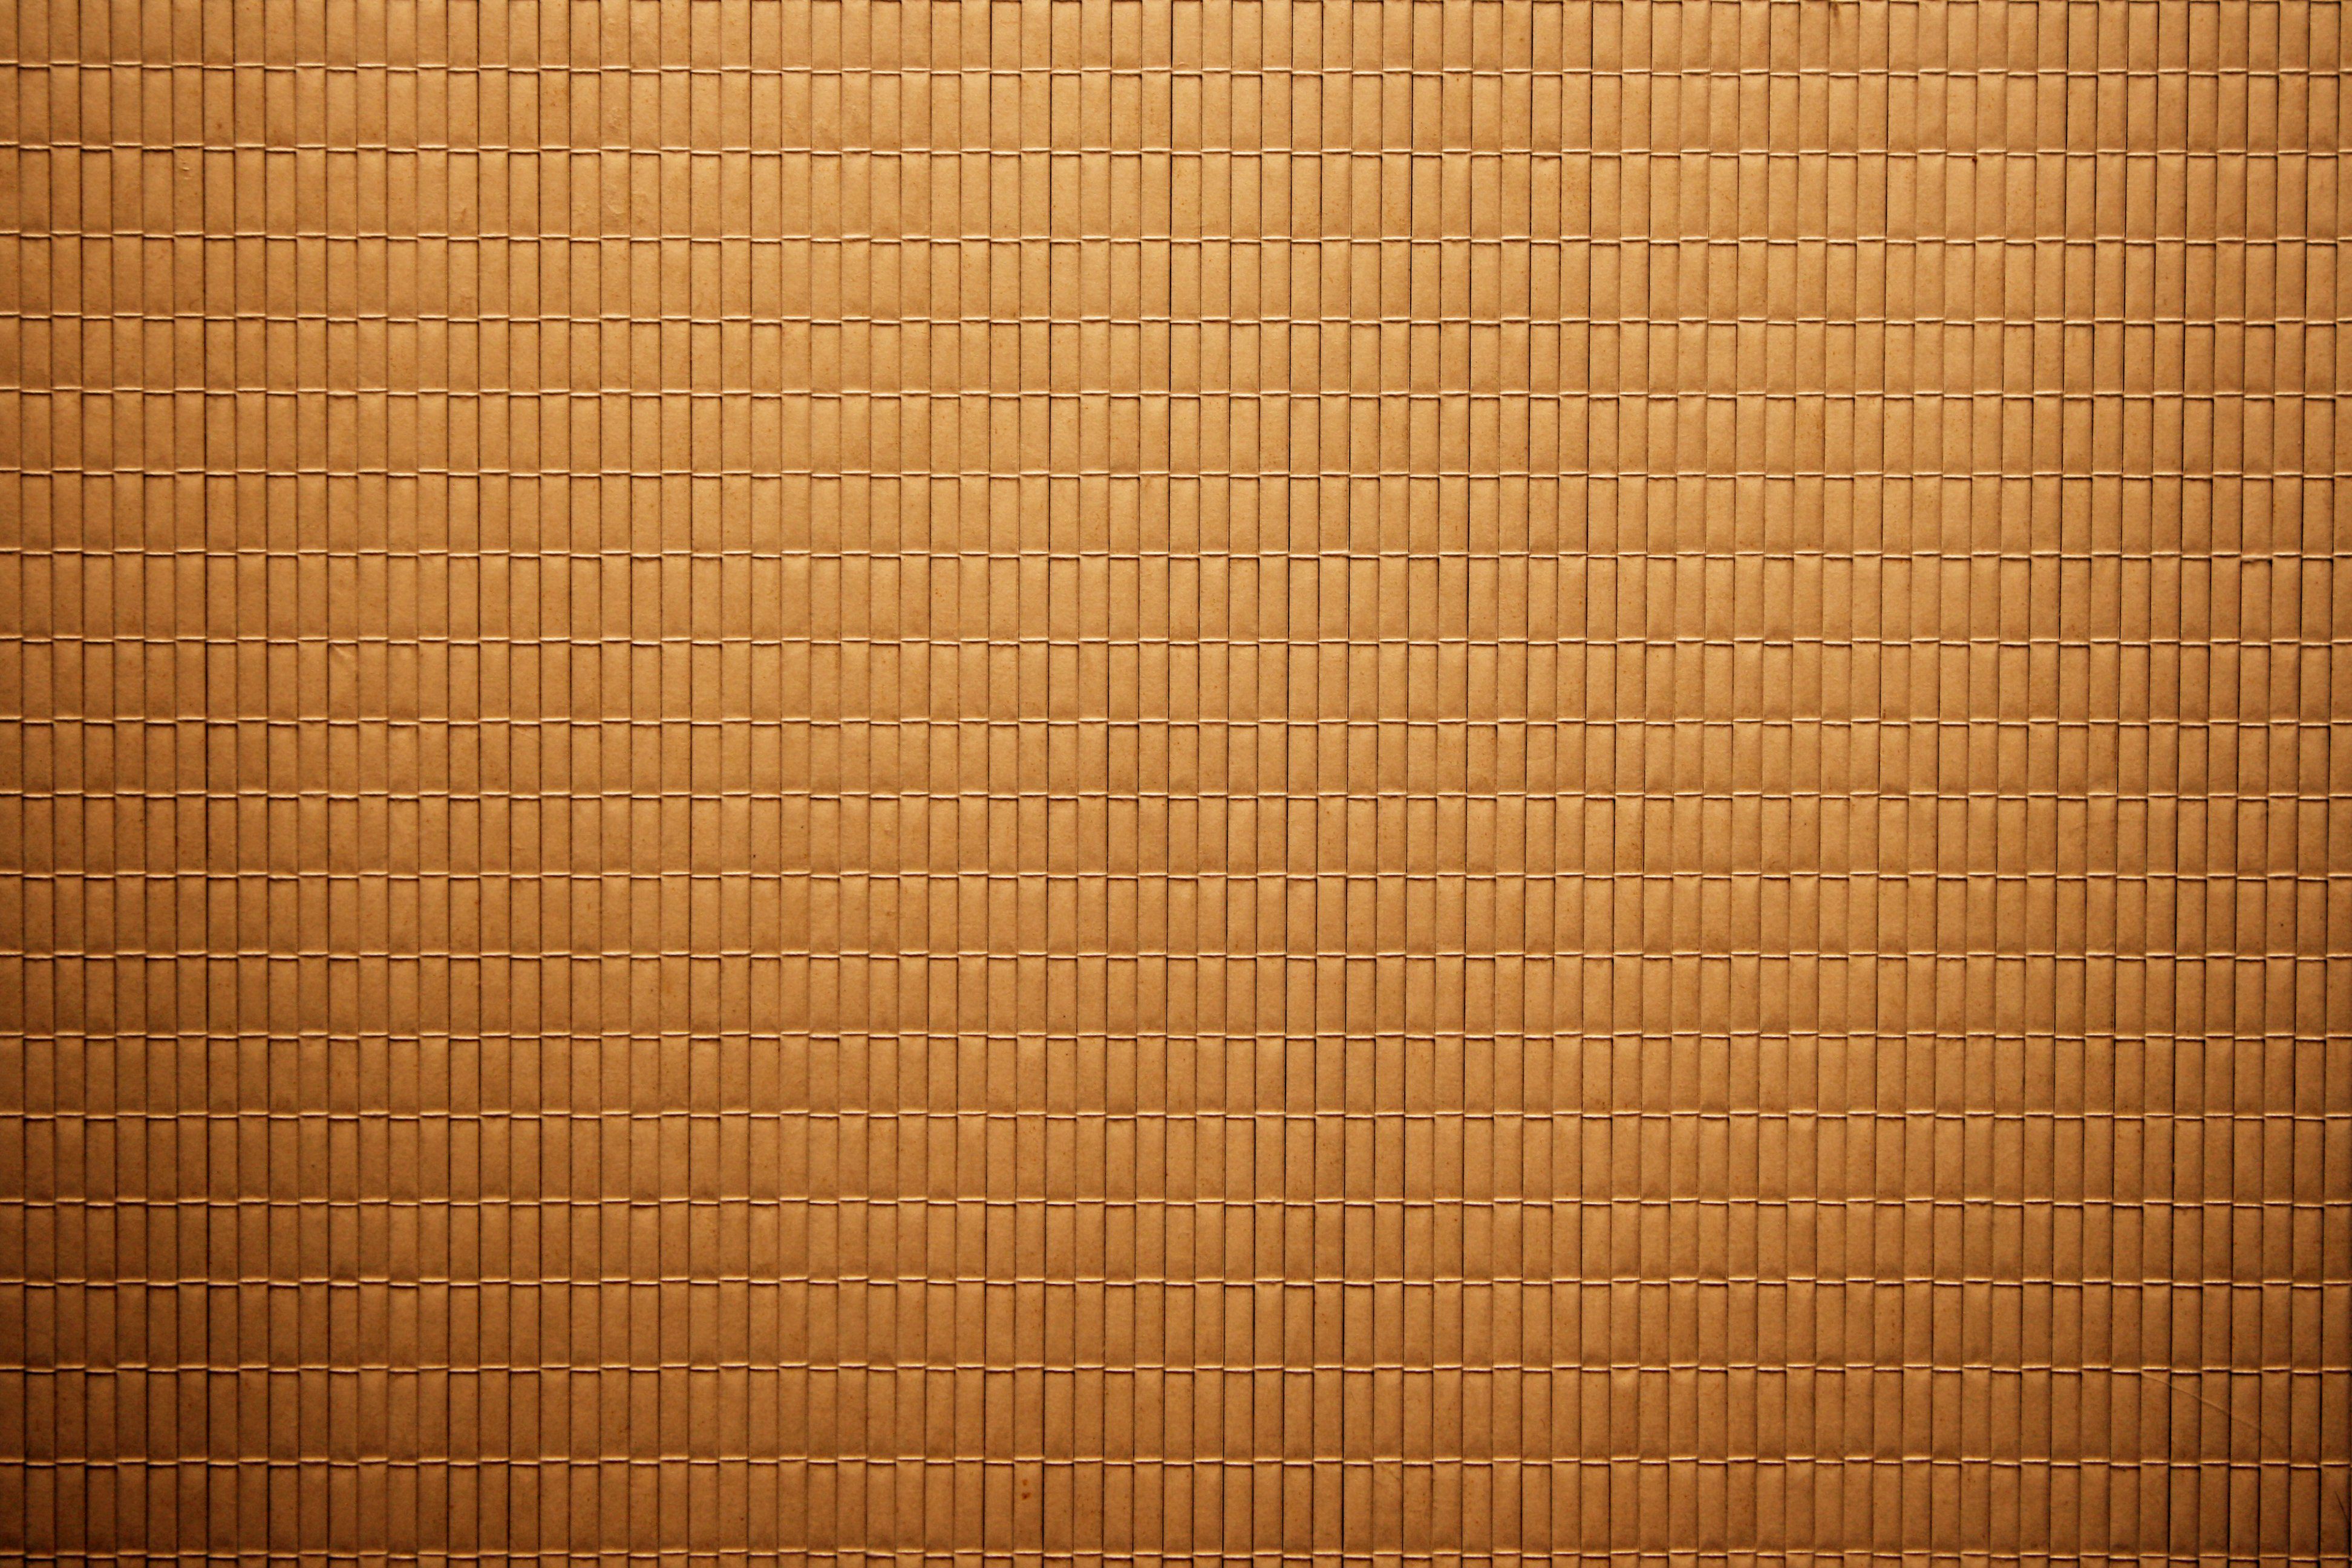 Brown Bamboo Mat Texture Picture. Free Photograph. Photo Public